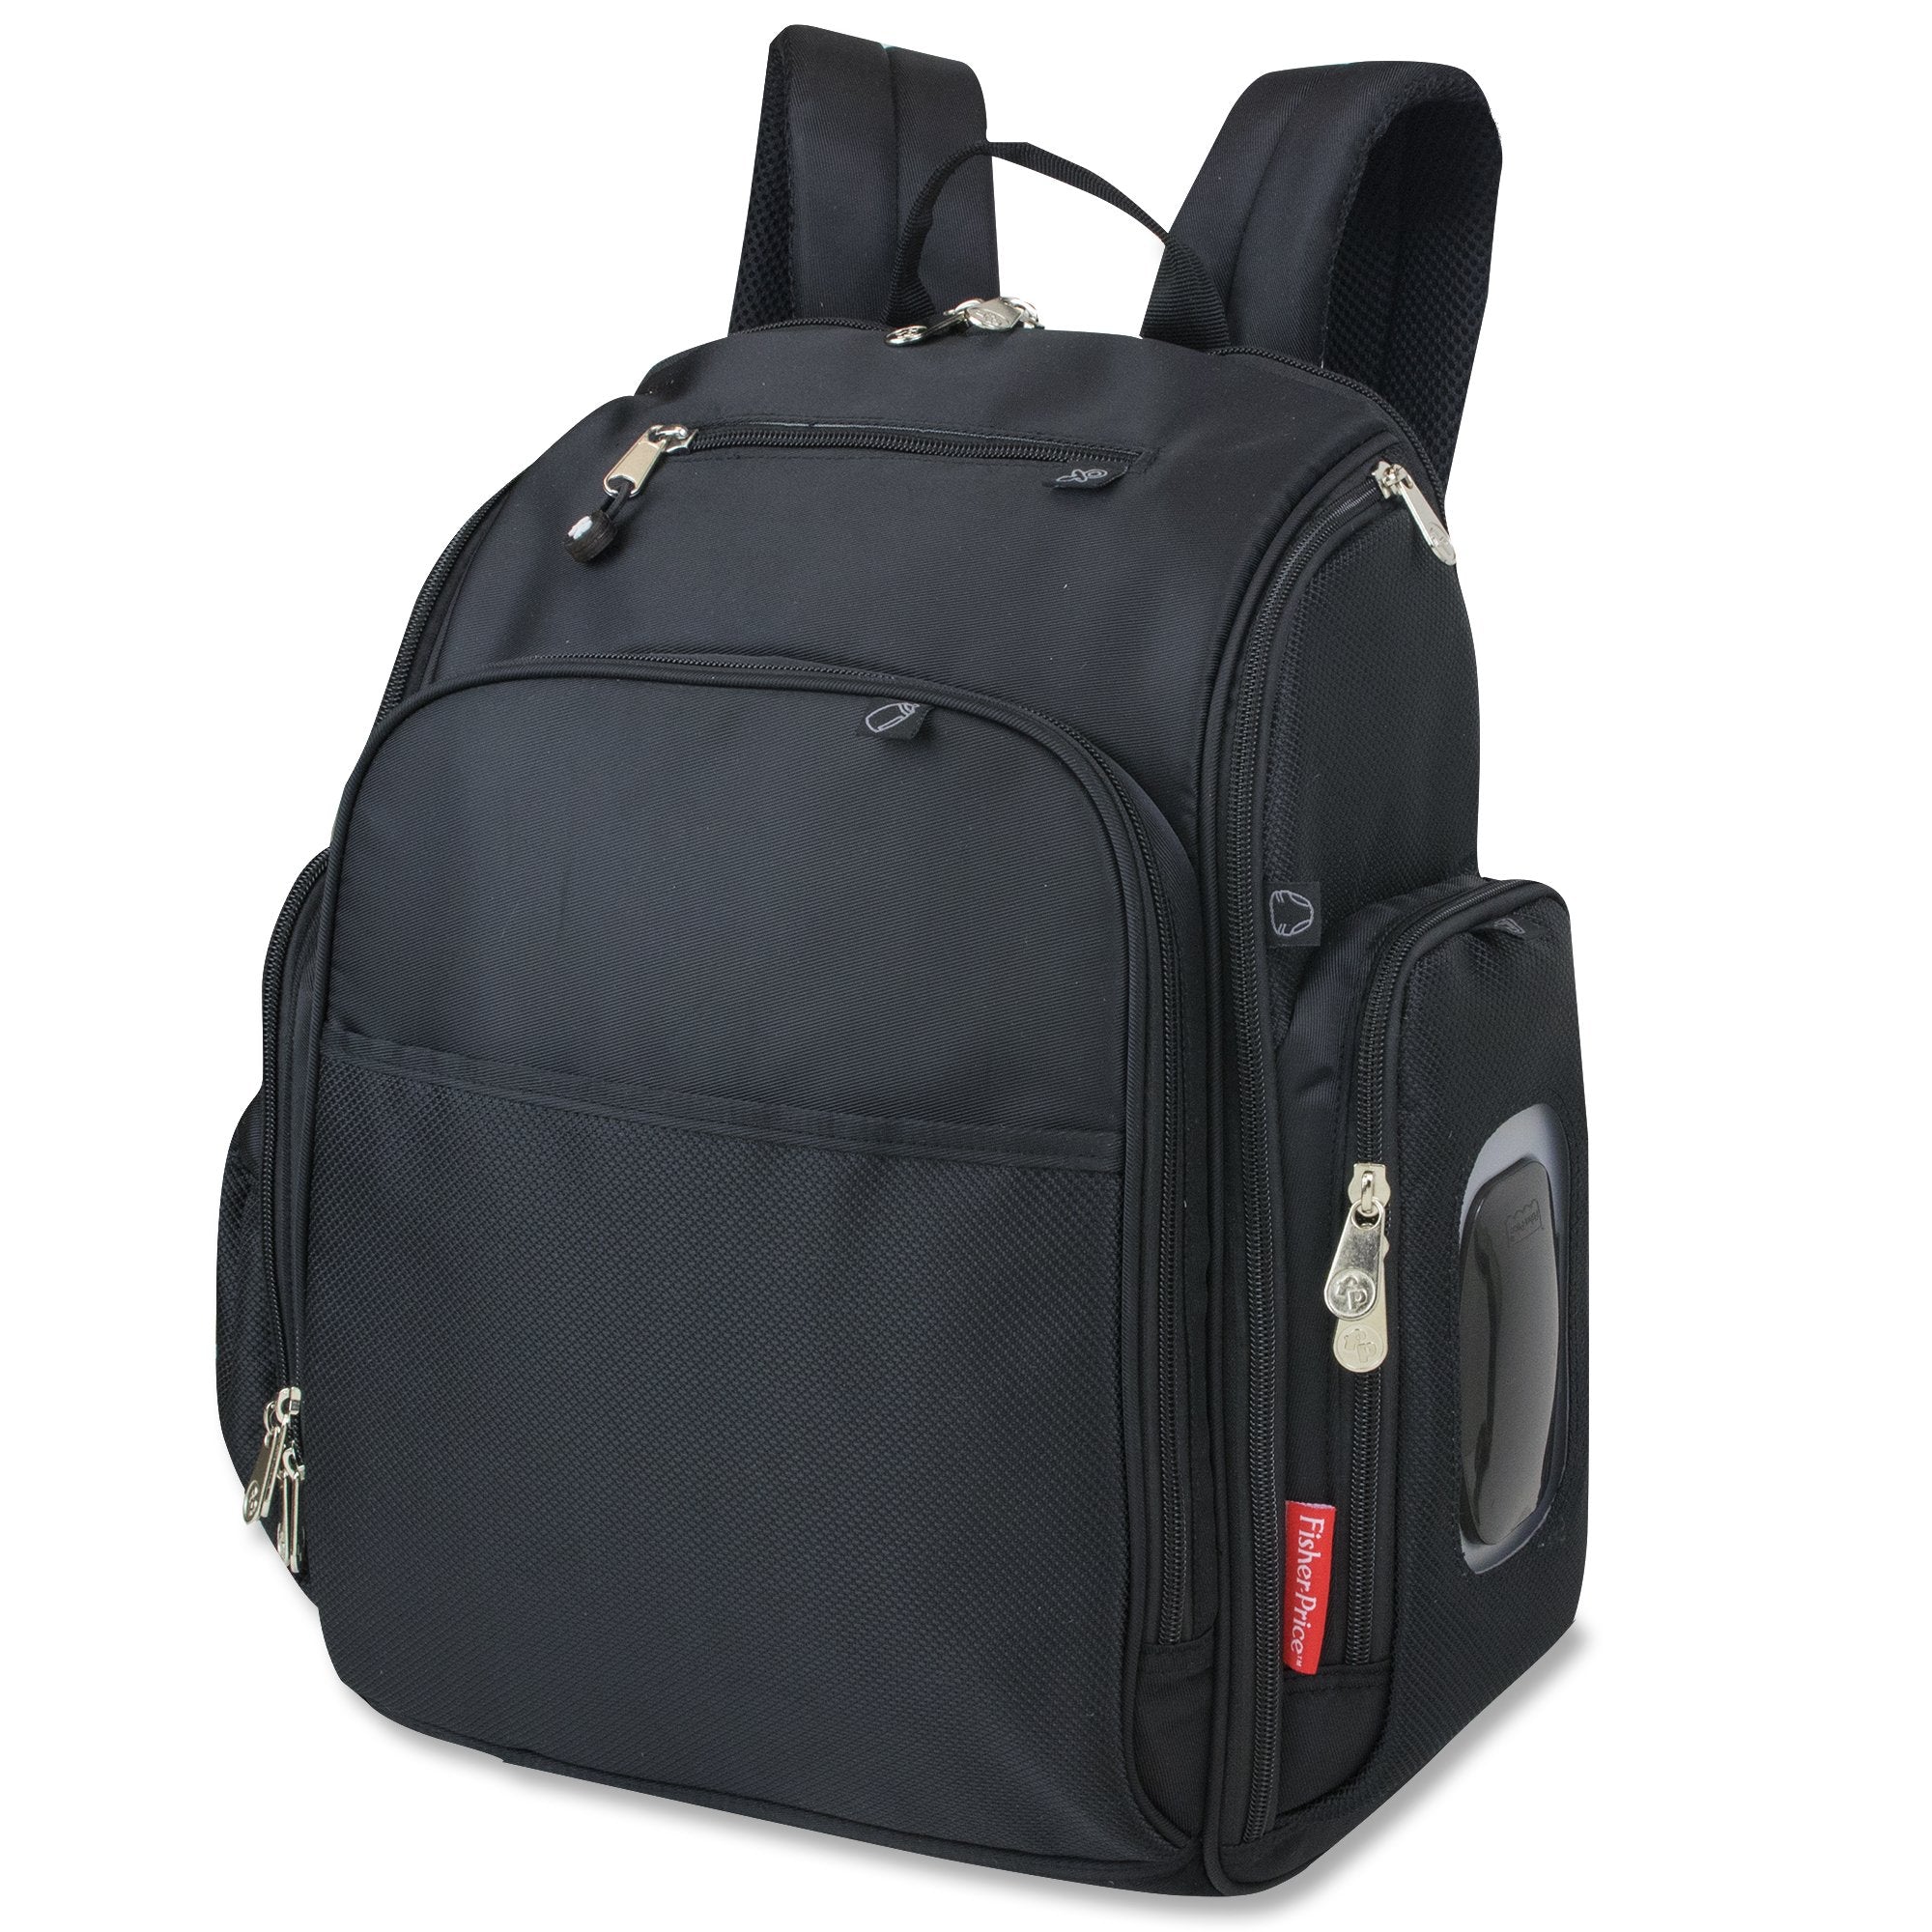 Nappy Bags - Fisher Price Fastfinder Diaper Bag Backpack (Black) was listed for R2,758.95 on 22 ...